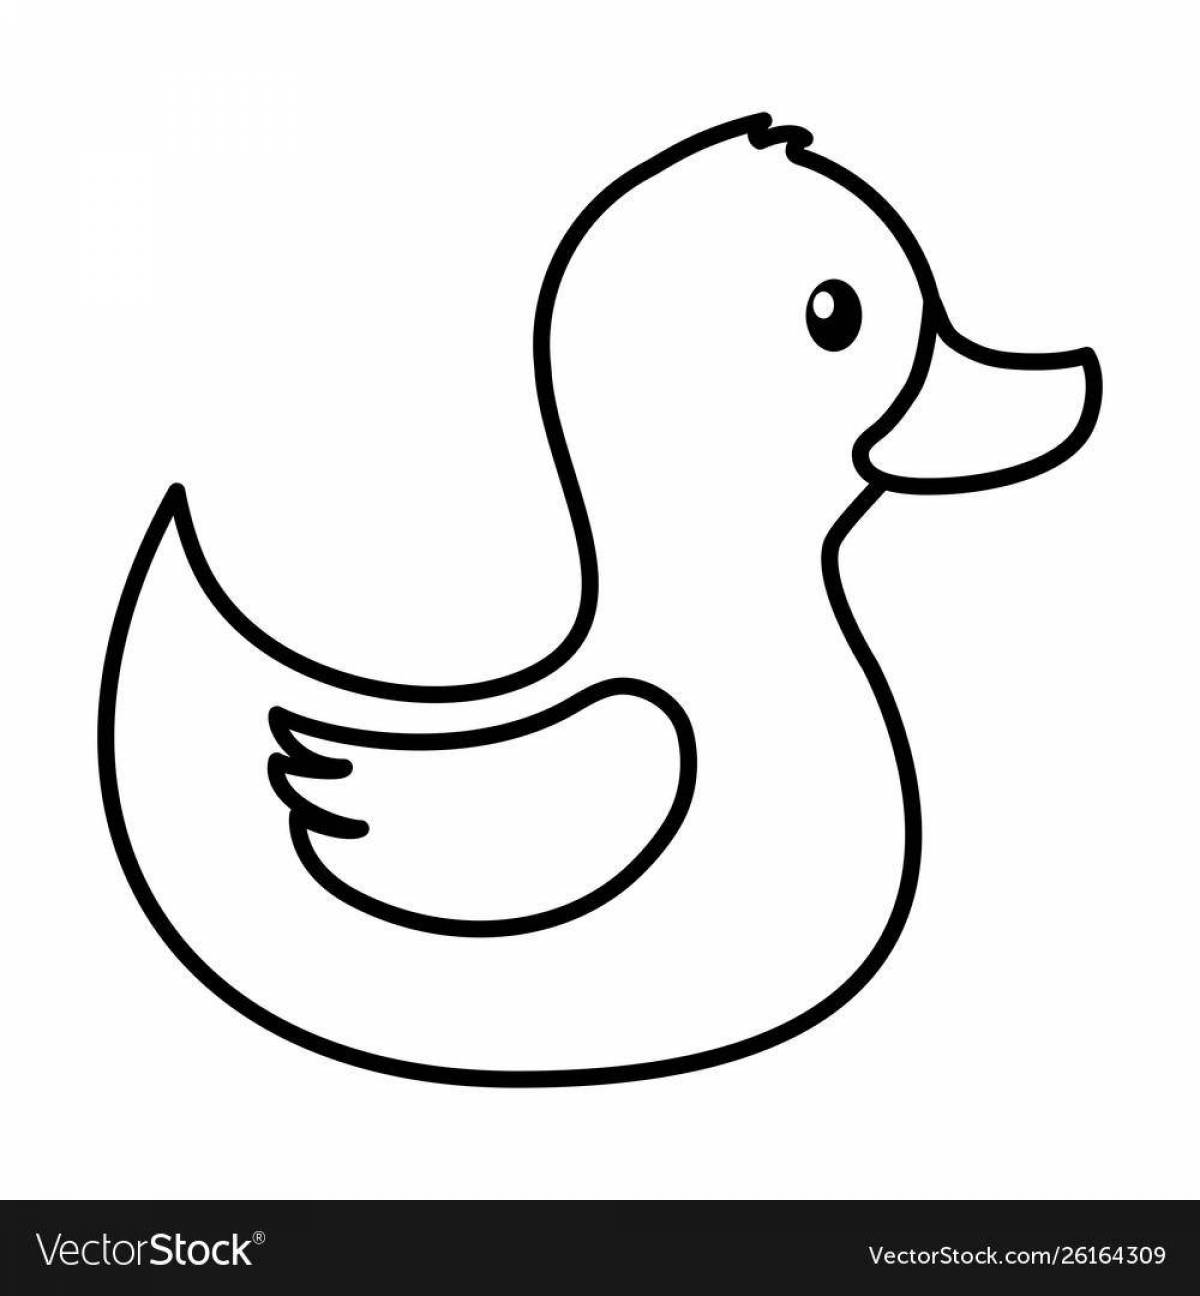 Exciting duck toy coloring page